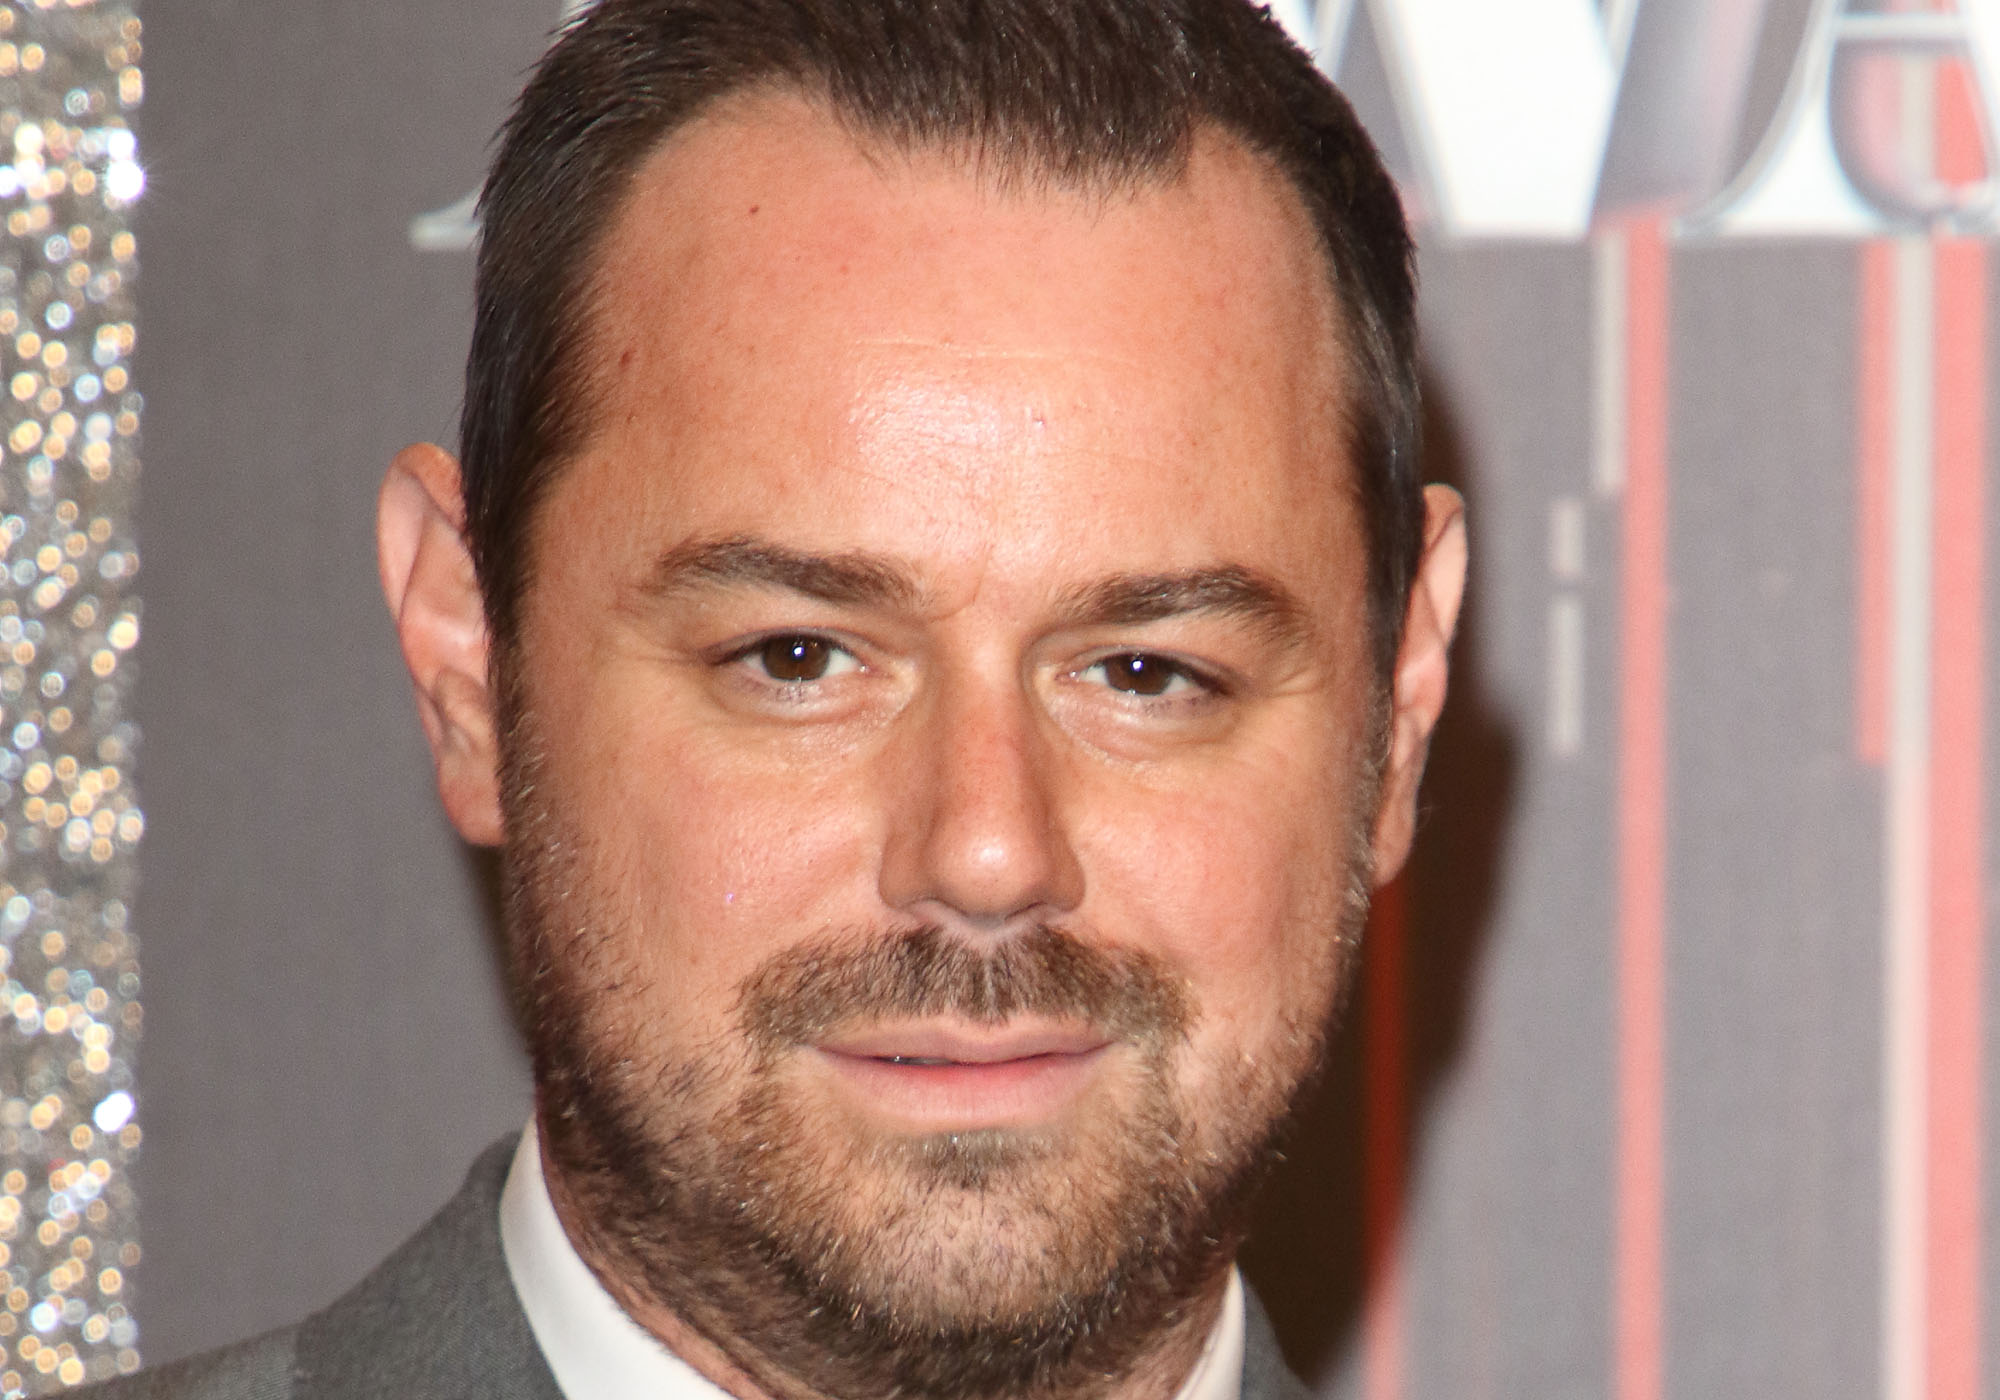 Danny dyer was born in the custom house area of east london, england, on 24...